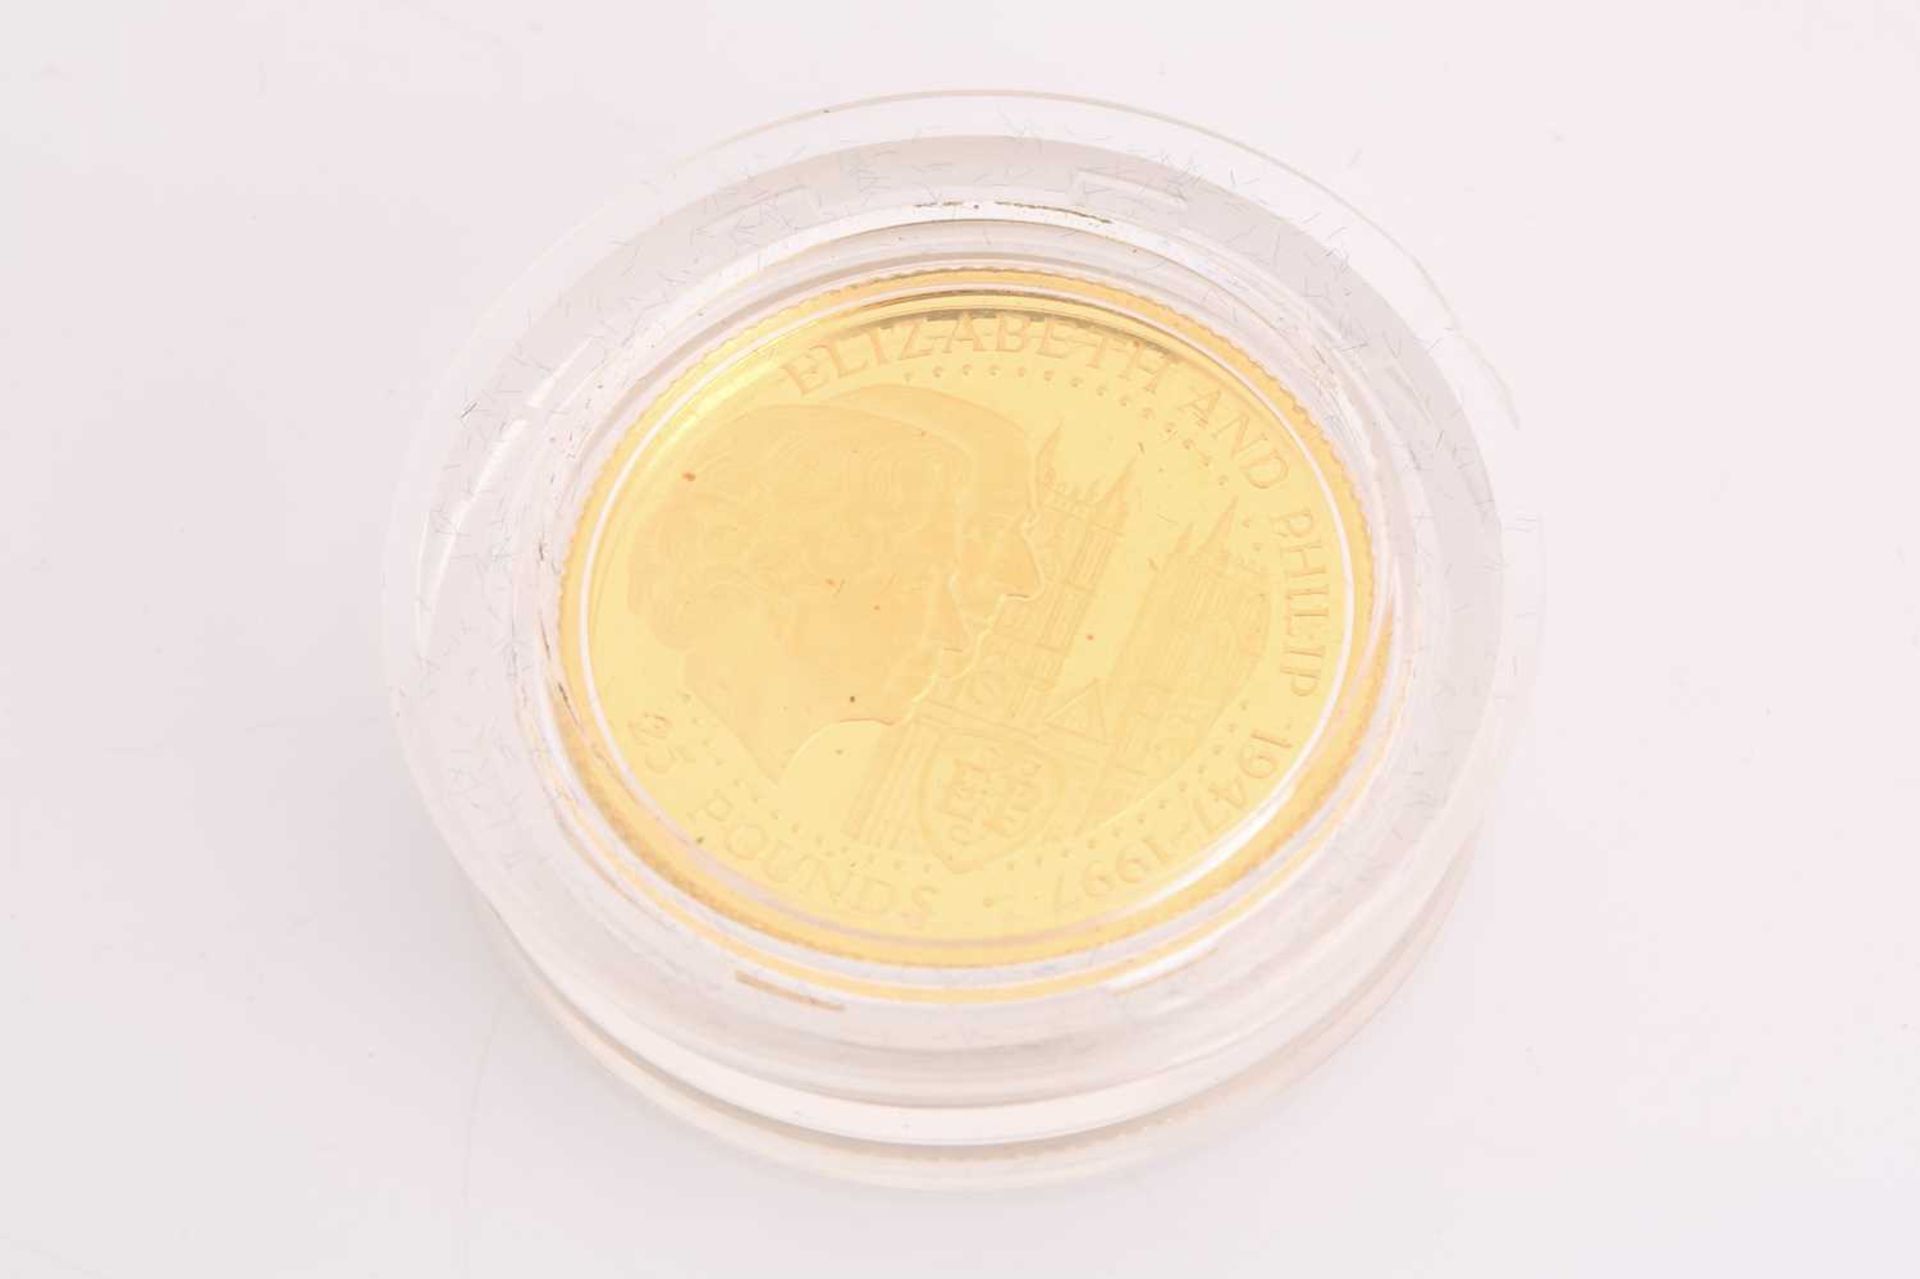 A 1997 Guernsey gold proof £25 coin, minted to celebrate the Golden Wedding Anniversary of Queen - Image 8 of 8